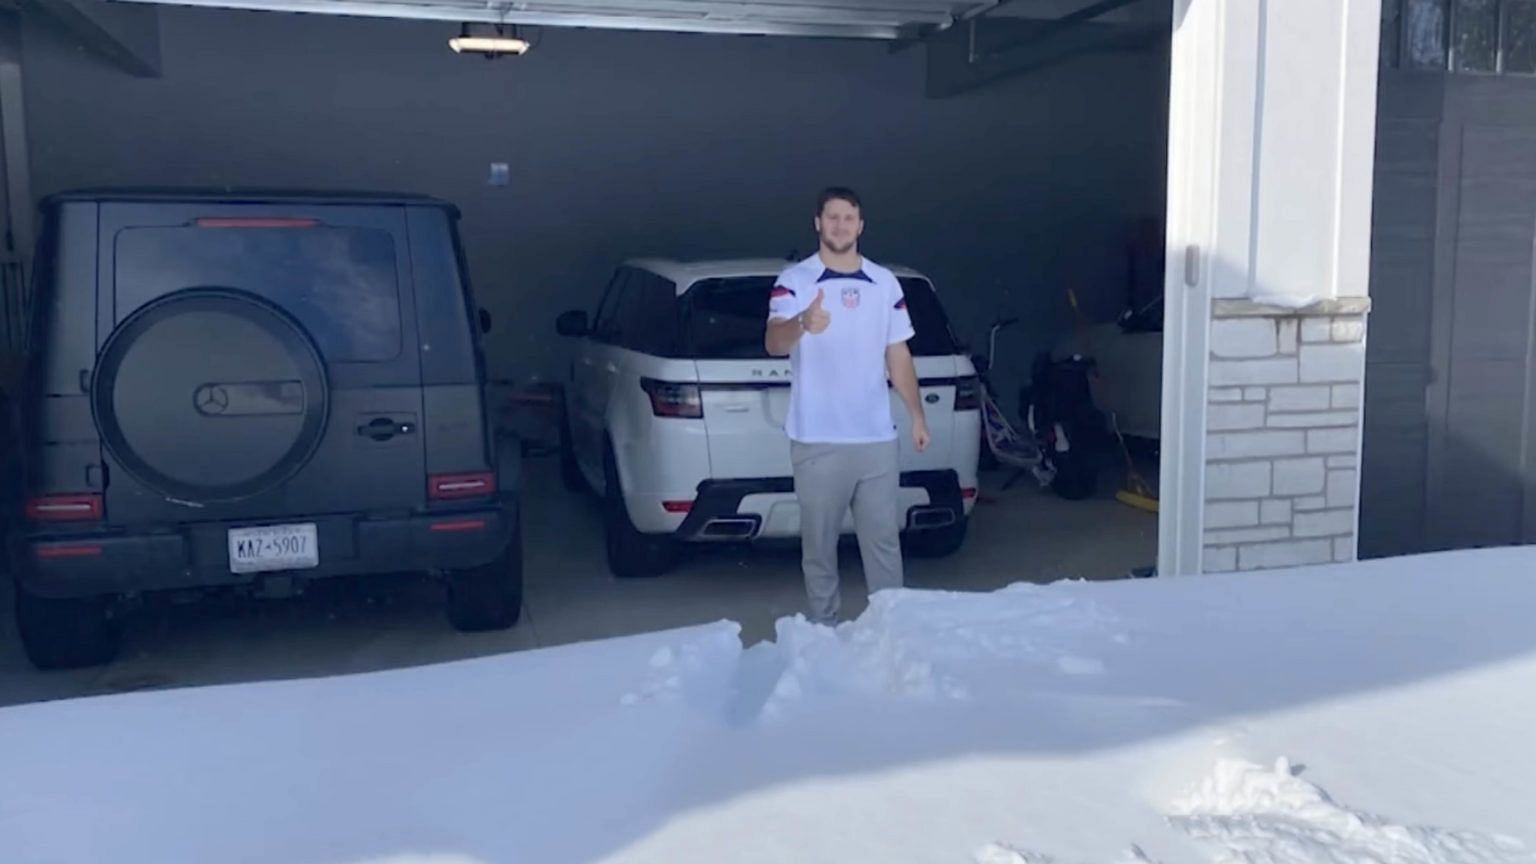 Josh allen in front of his white Range Rover Sport - Image source - Cowboystatedaily.com